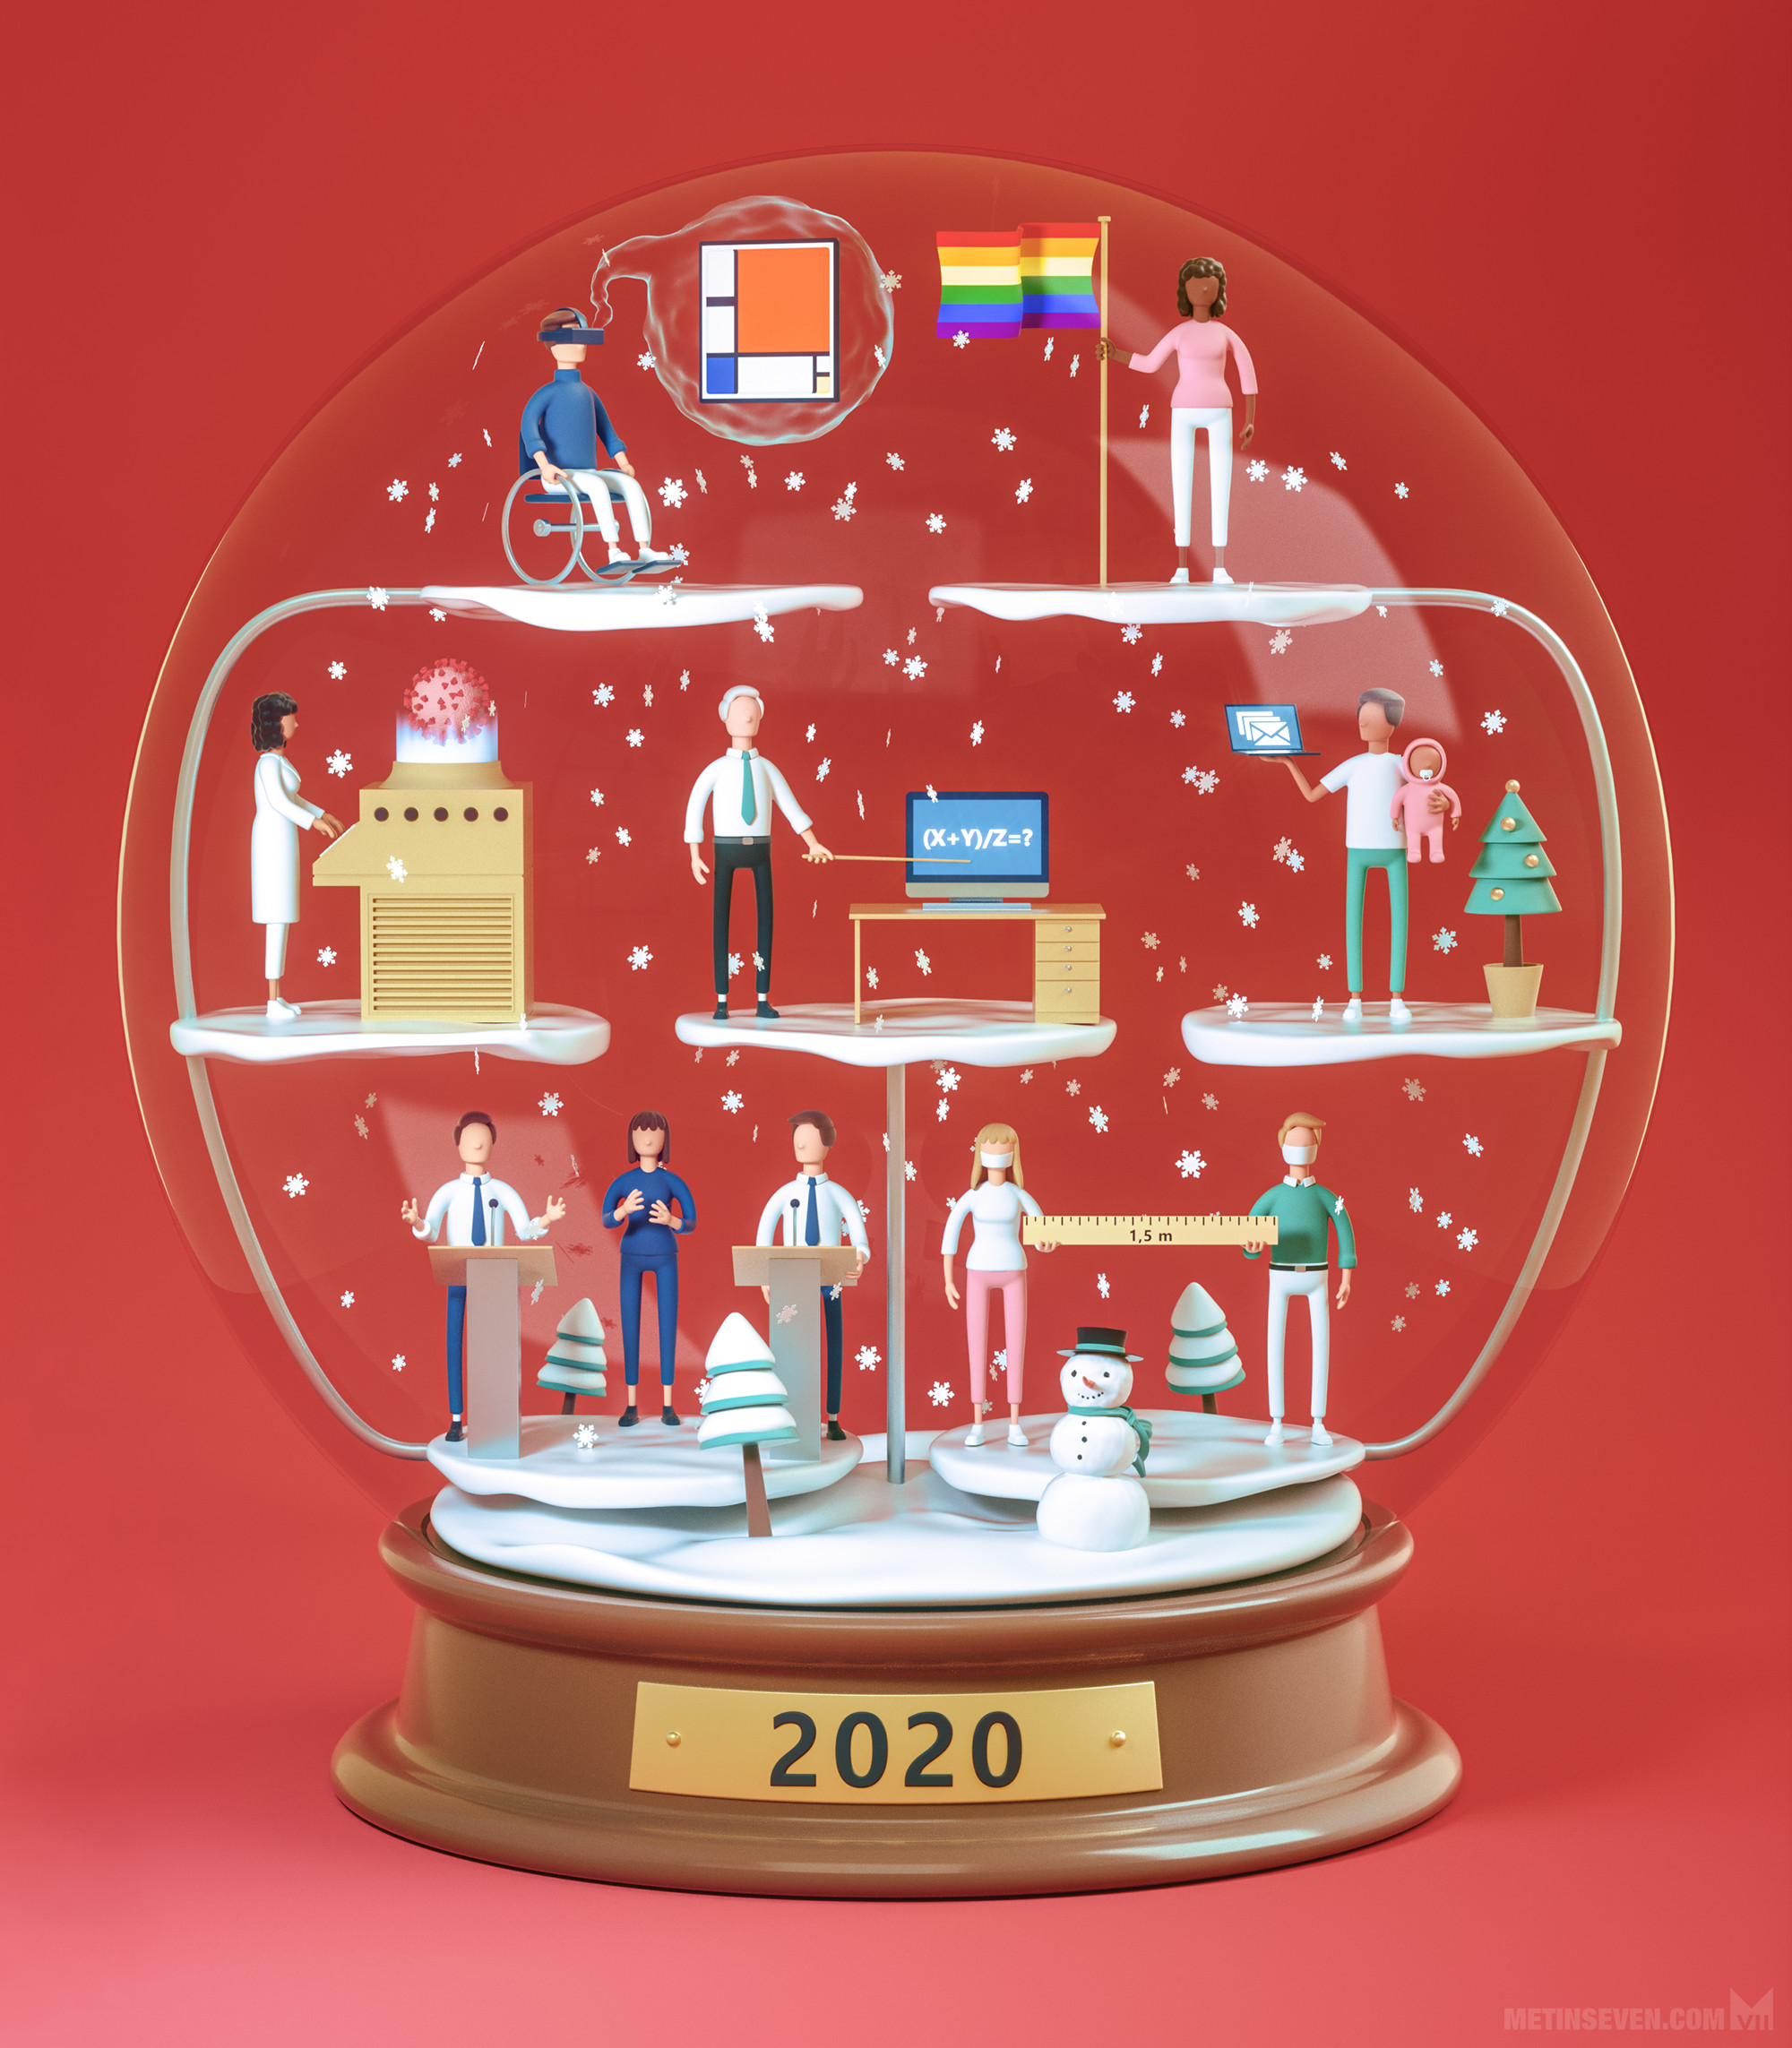 Stylized 3D illustration for the Dutch Ministry of Education, Culture and Science, containing elements of 2020